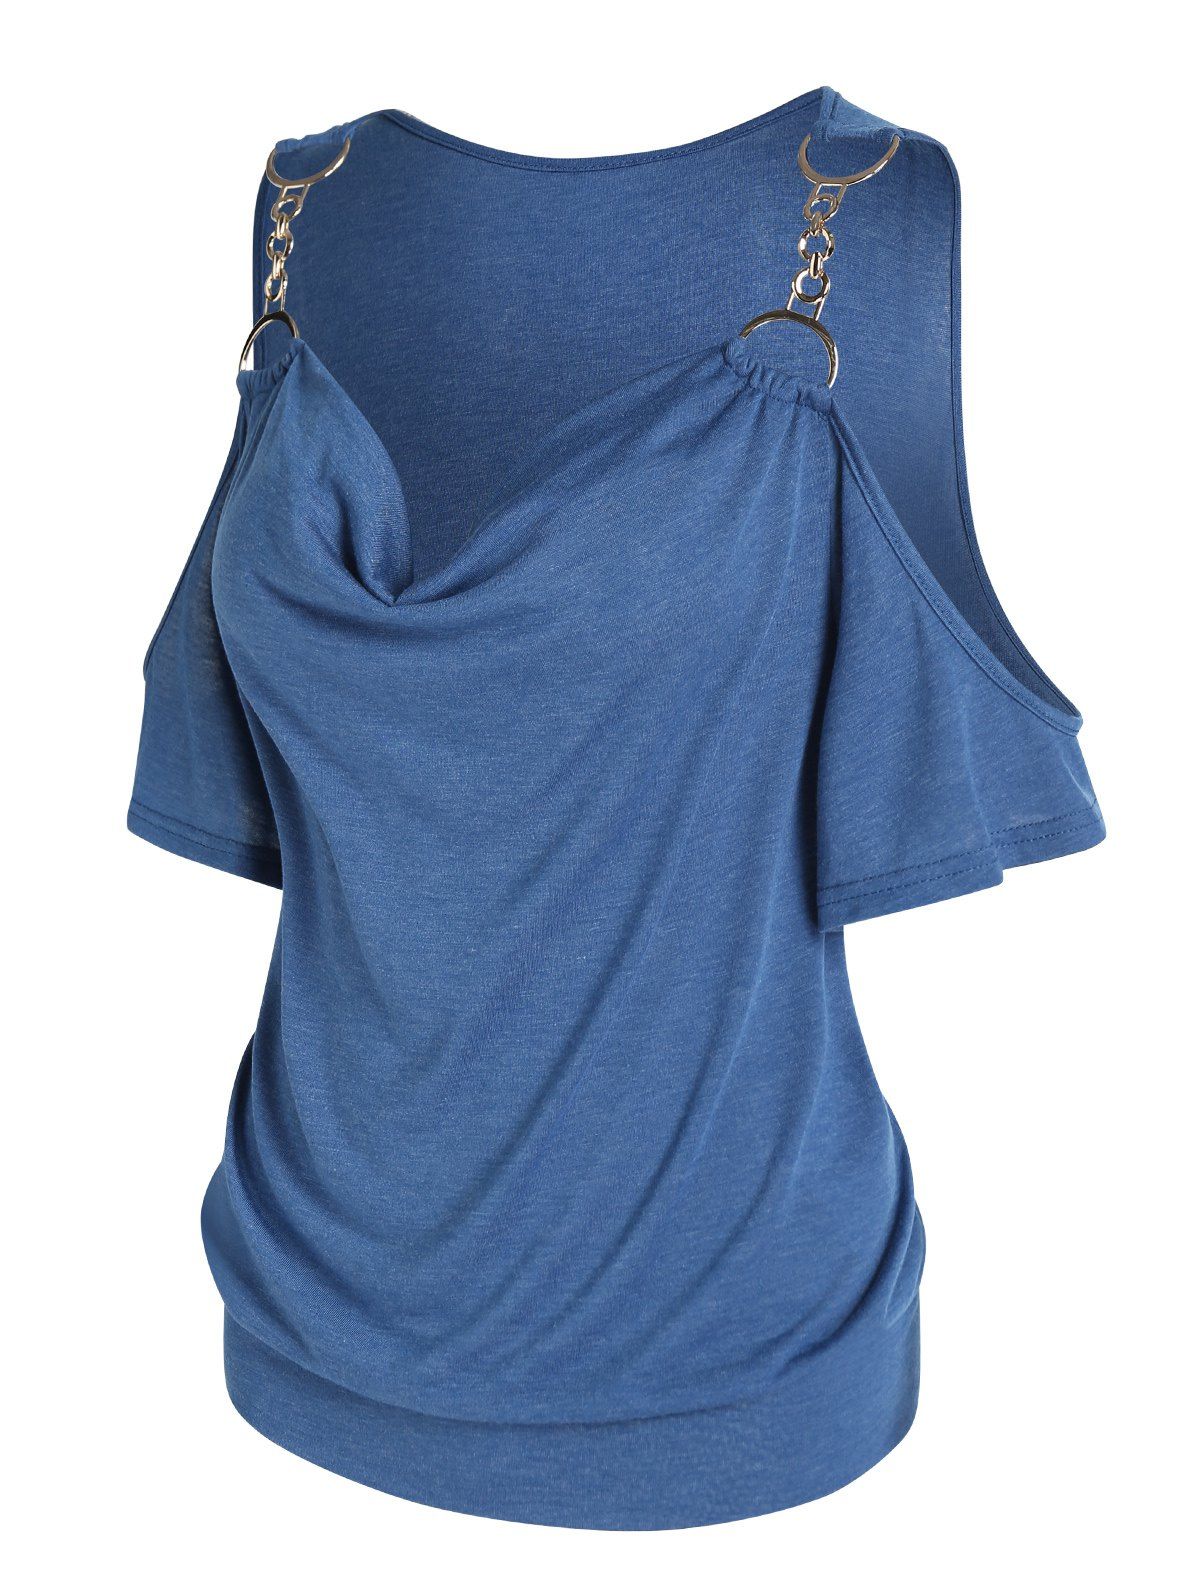 Casual T Shirt Solid Color T Shirt Draped Cowl Neck Short Sleeve Trendy Summer Tee - BLUE L